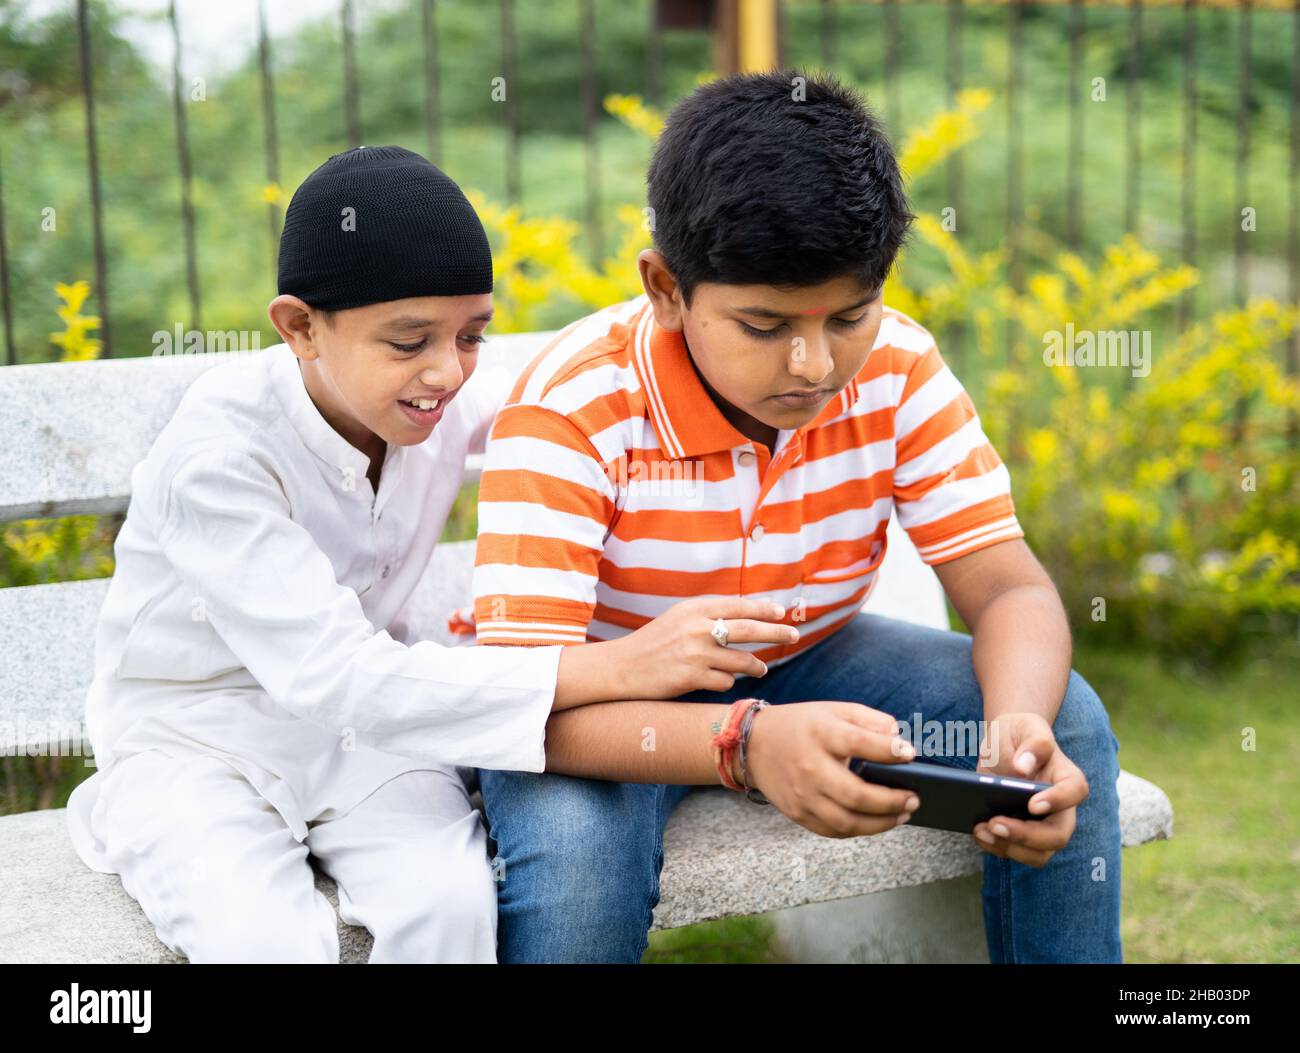 Mutiethnic kids playing video game on mobile phone at park - concept of technology, smartphone addiction, friendship and leisure activities Stock Photo